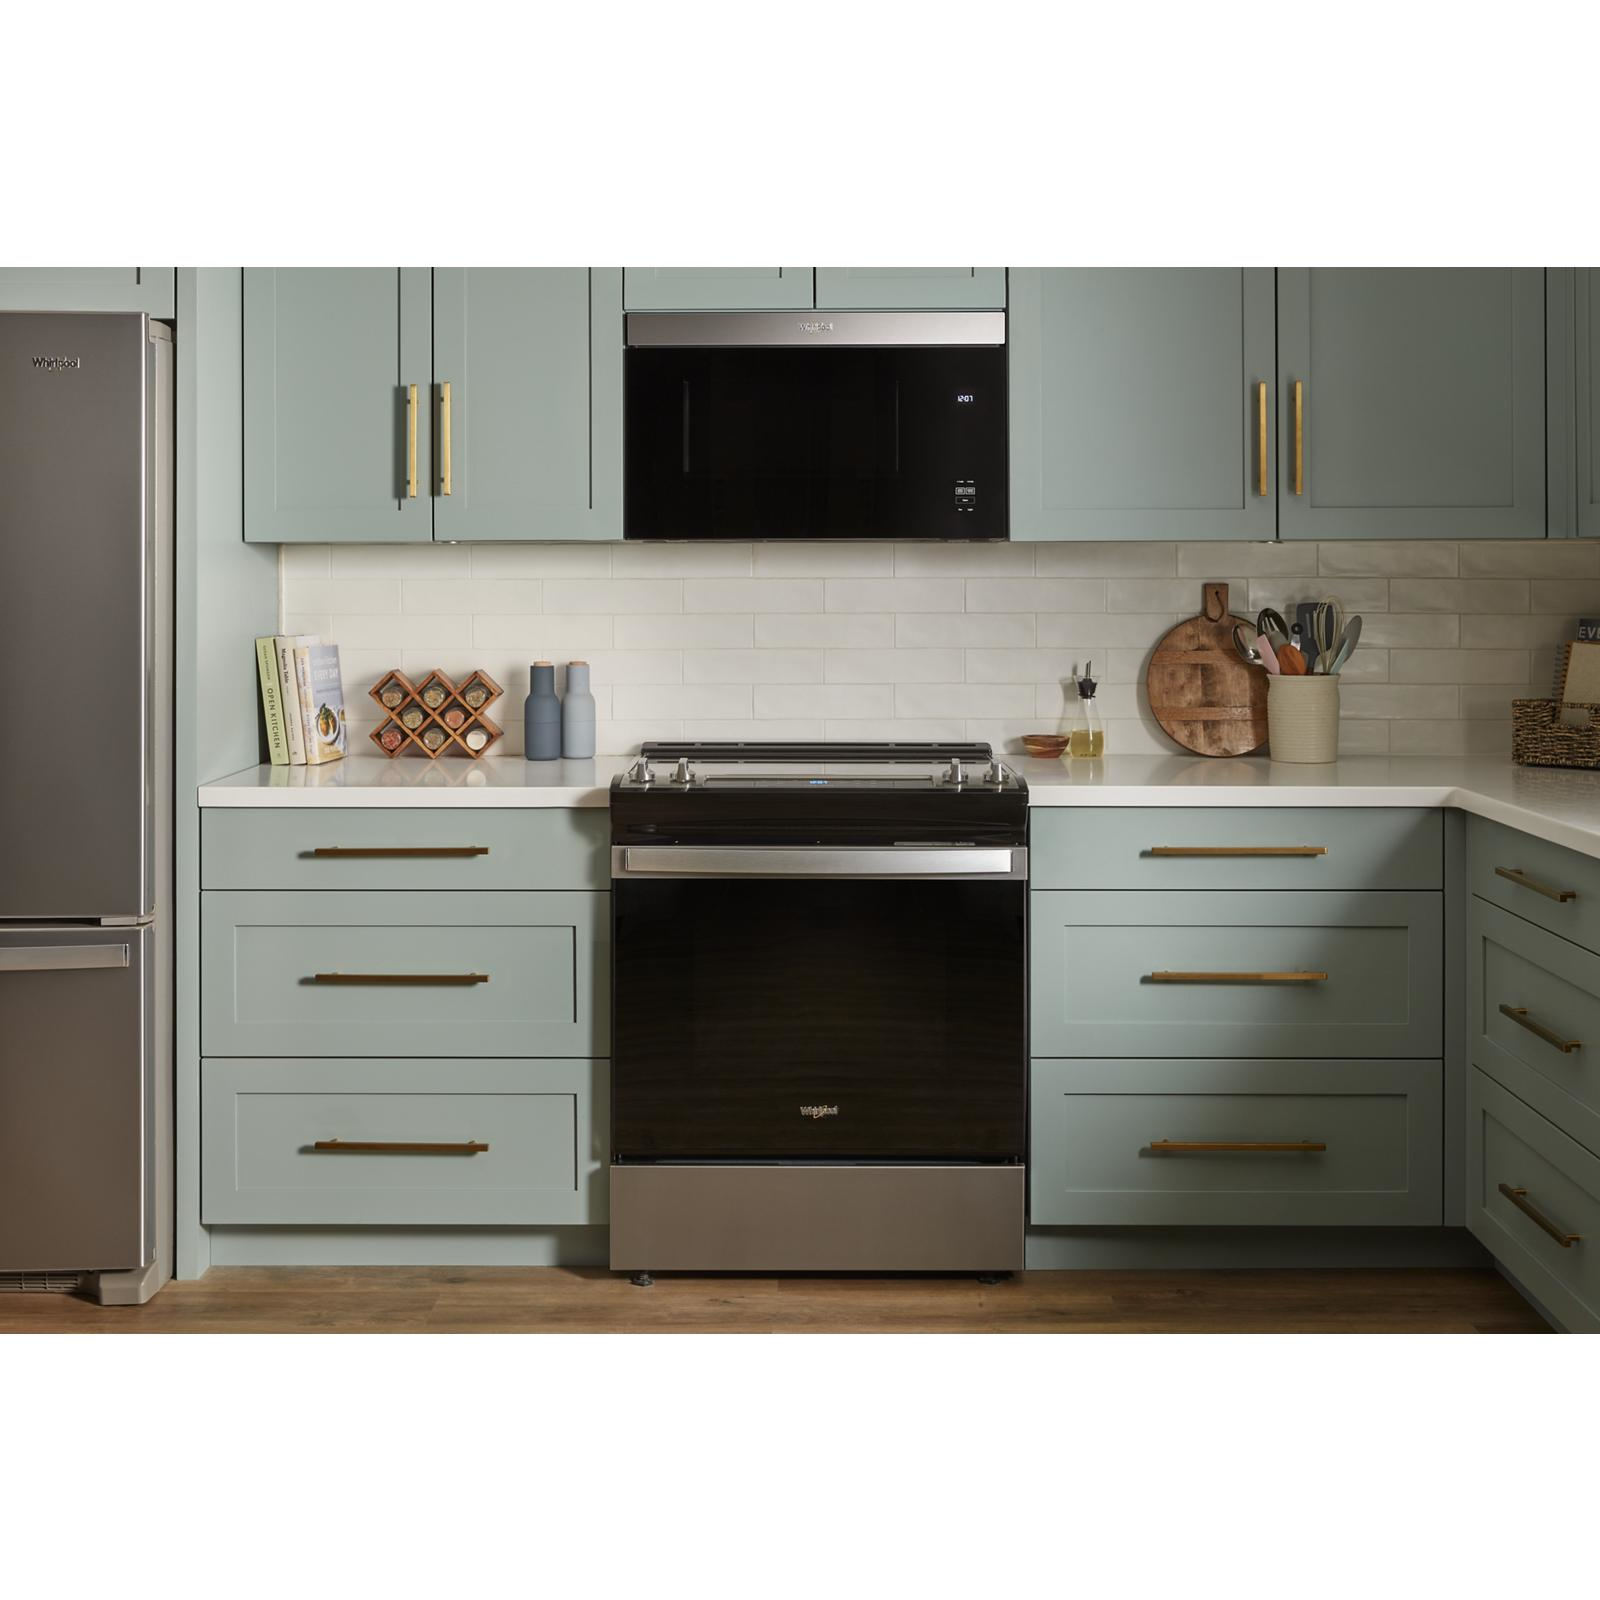 Whirlpool - 1.1 cu. Ft  Over the range Microwave in Stainless - YWMMF5930PZ